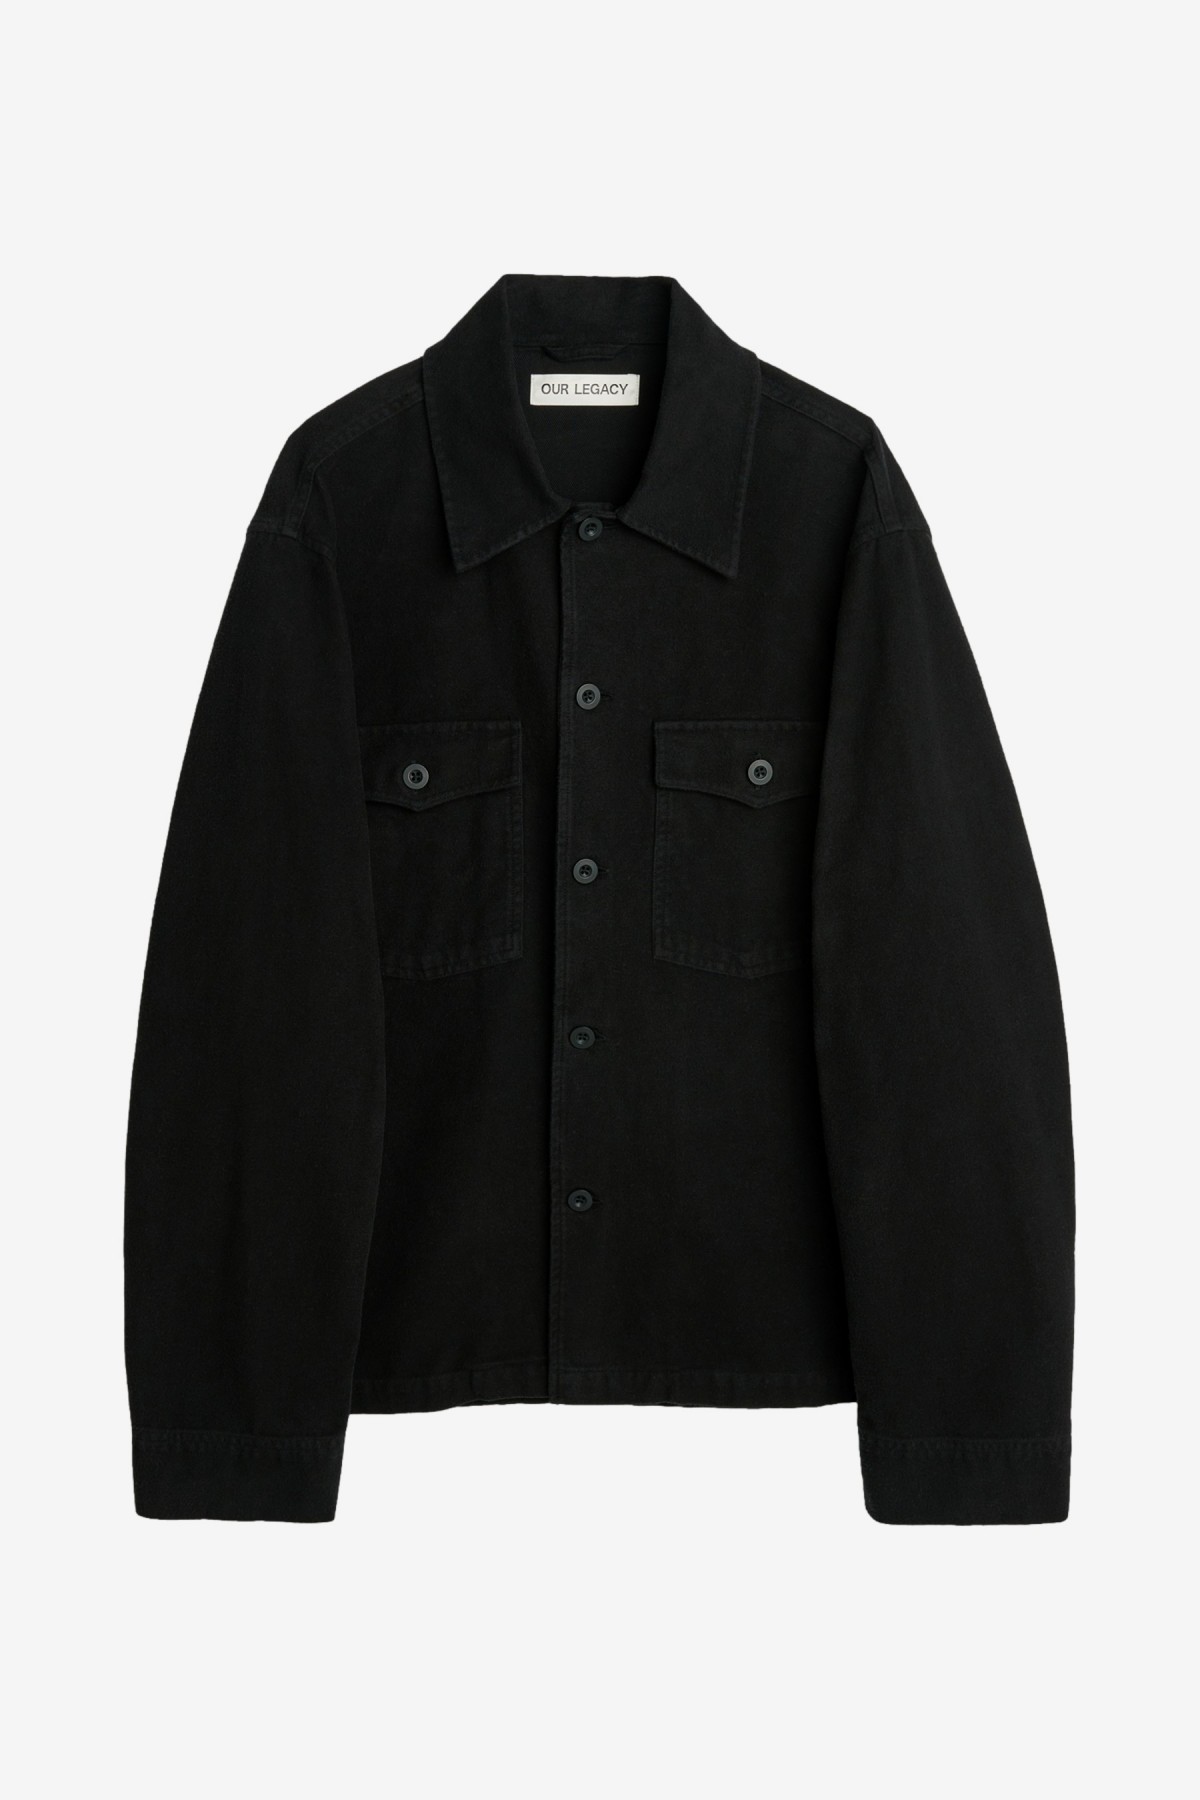 Evening Coach Jacket in Black Brushed Cotton - Our Legacy | Afura Store